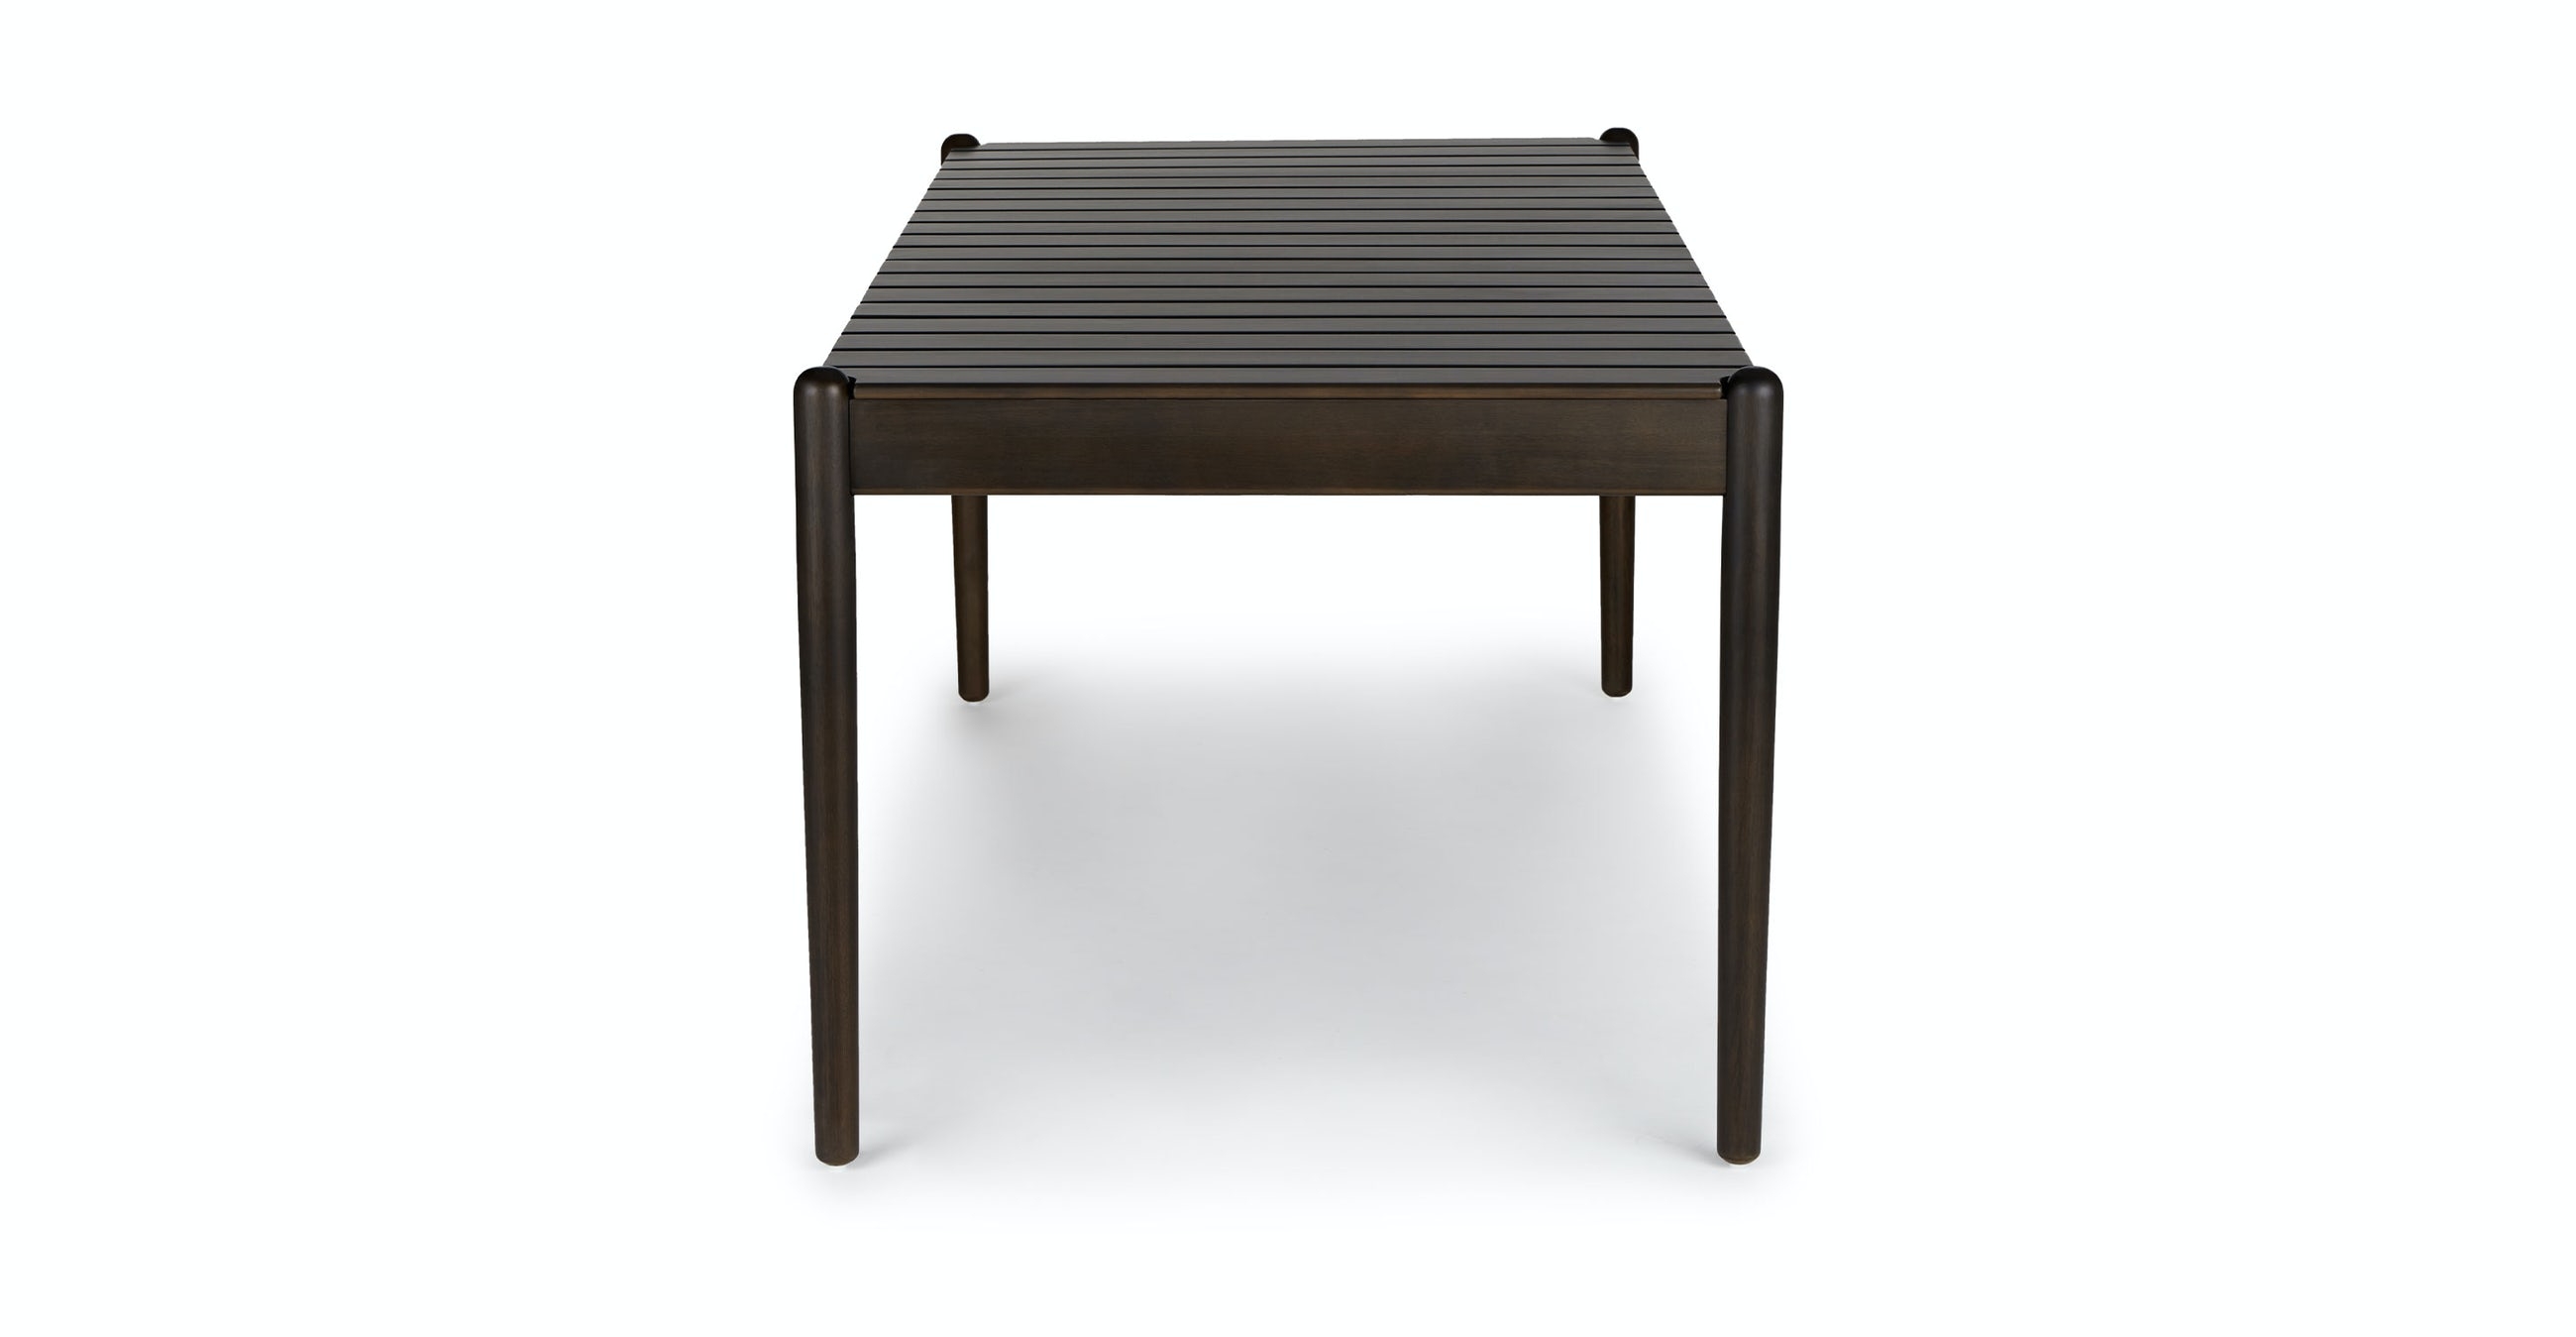 Lagora Bistro Brown Dining Table for 6 - Image 1